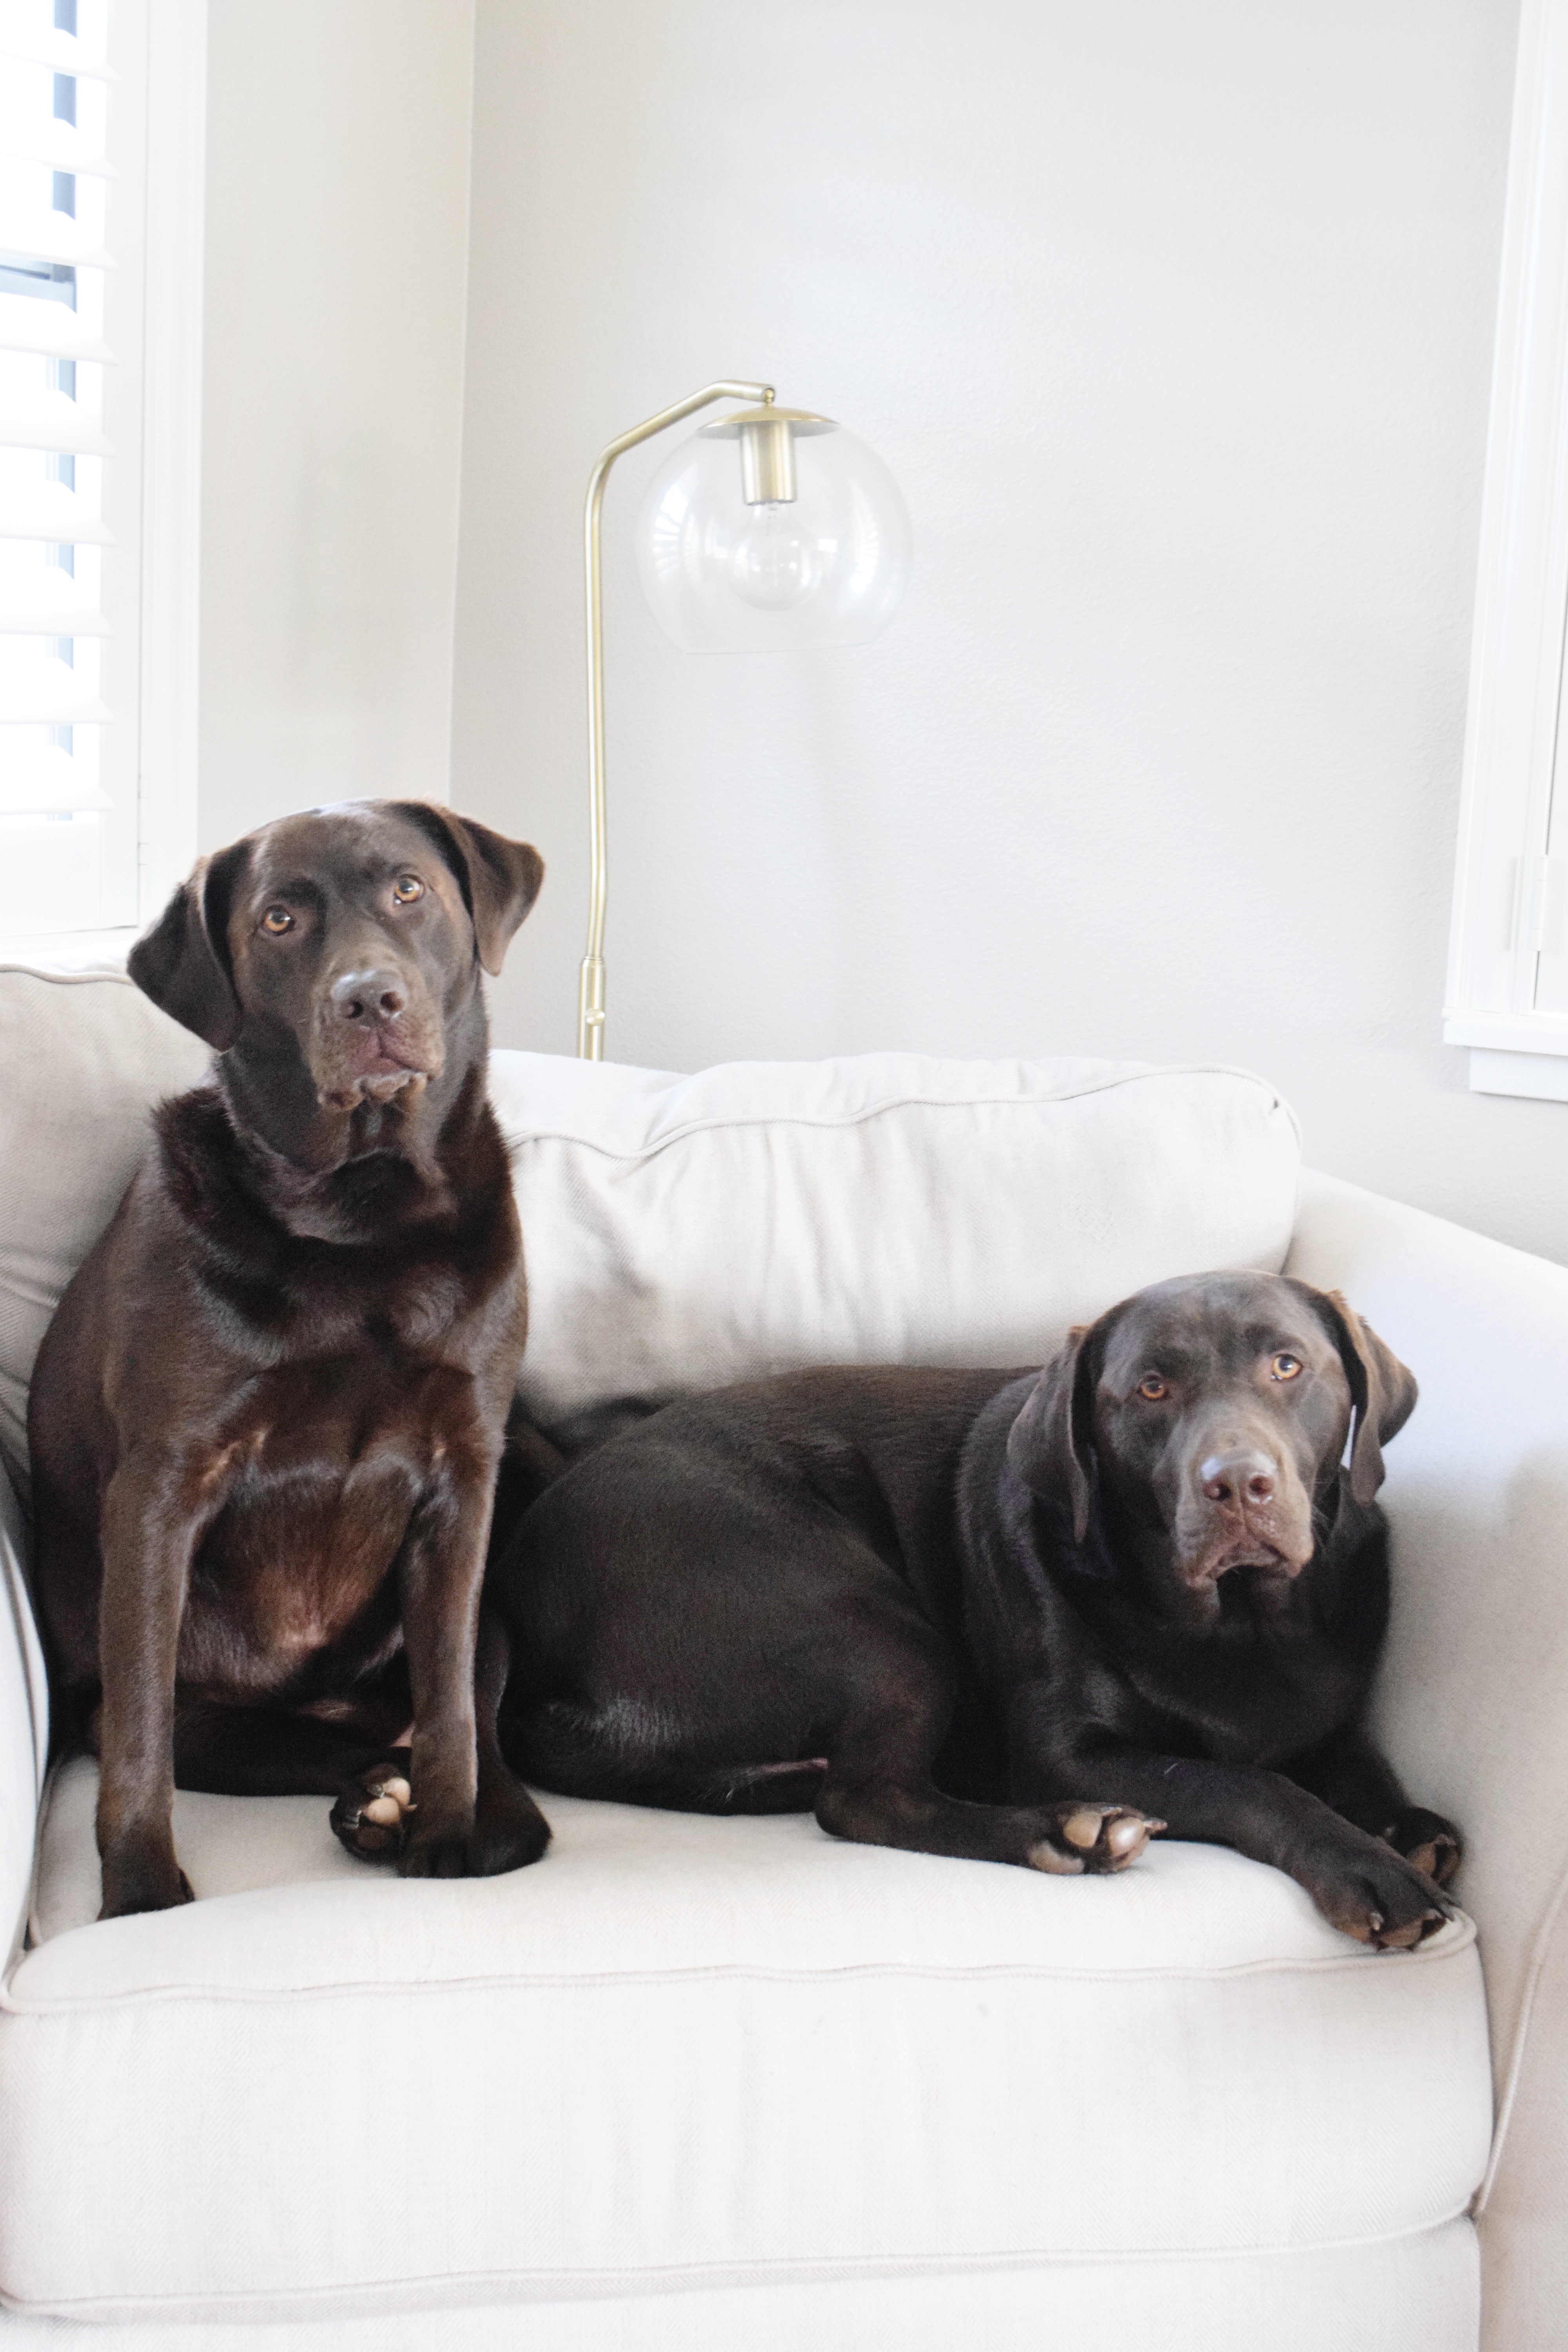 Oversized Cream Chair - Chocolate Labradors - Hawaiian Home Feature on Apartment Therapy - CommuniKait